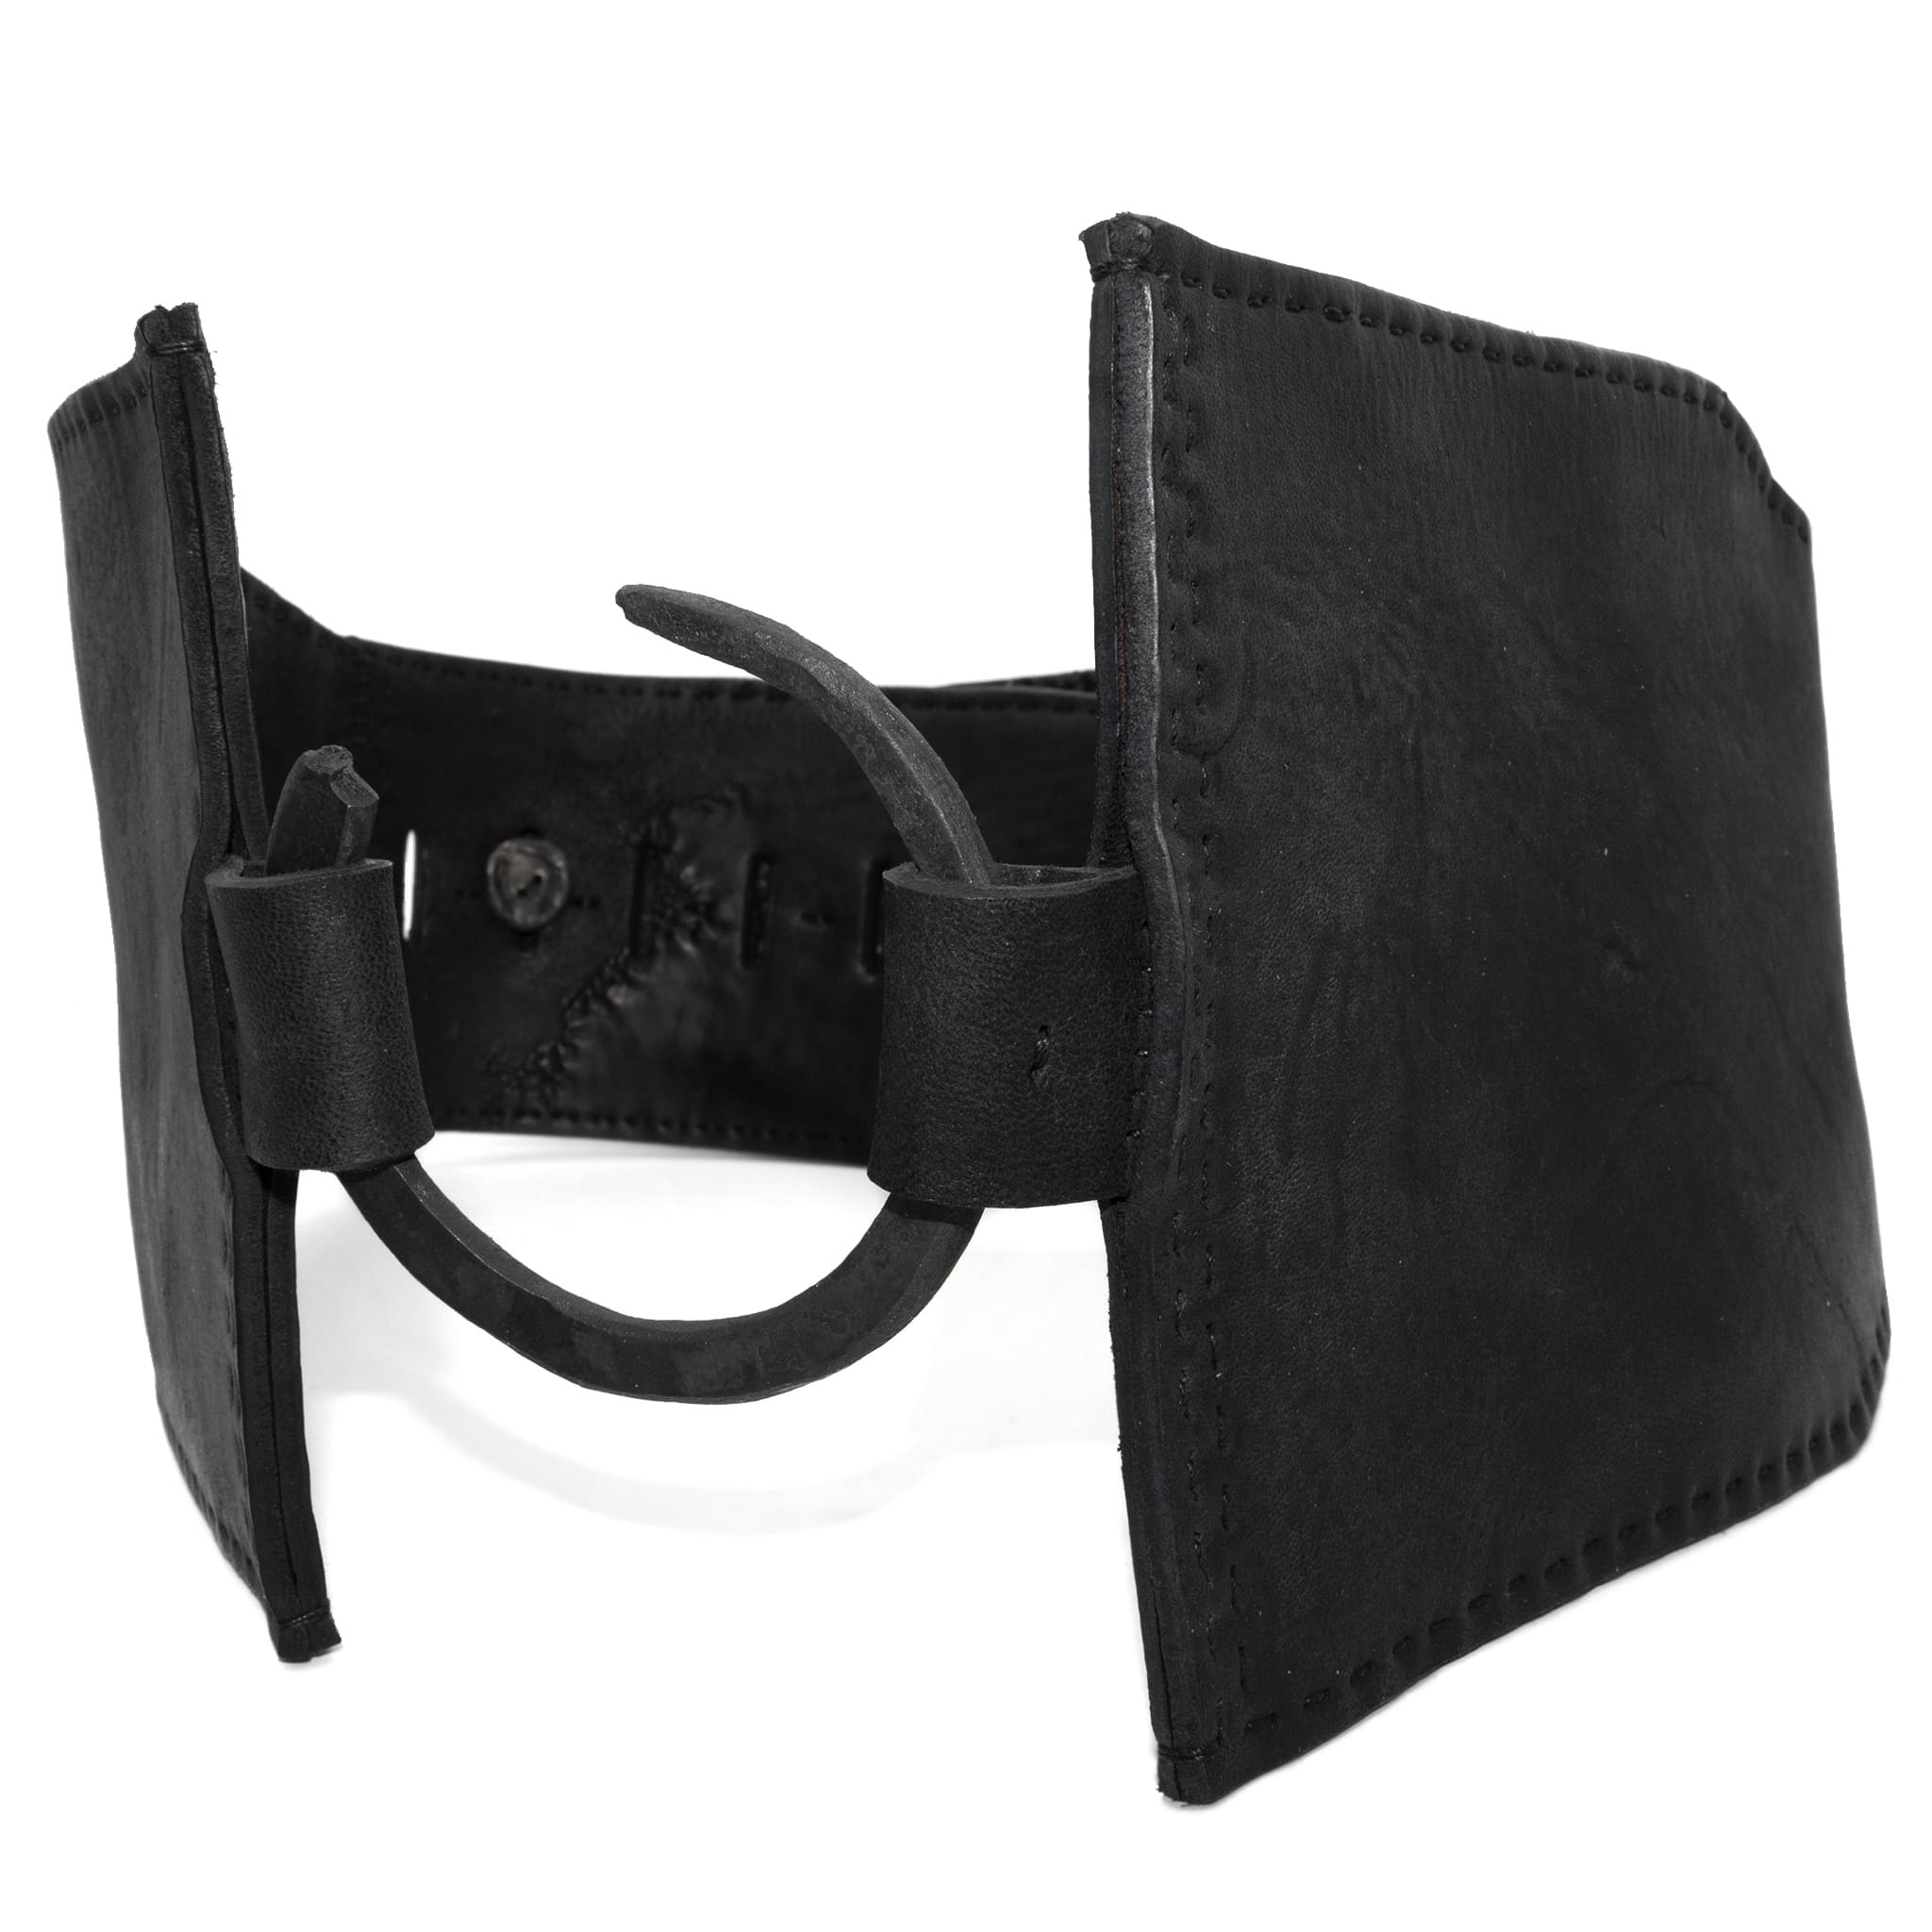 shop and explore a meticulous collection of avant garde hand sewn culatta leather waist belts online at atelierskn.com